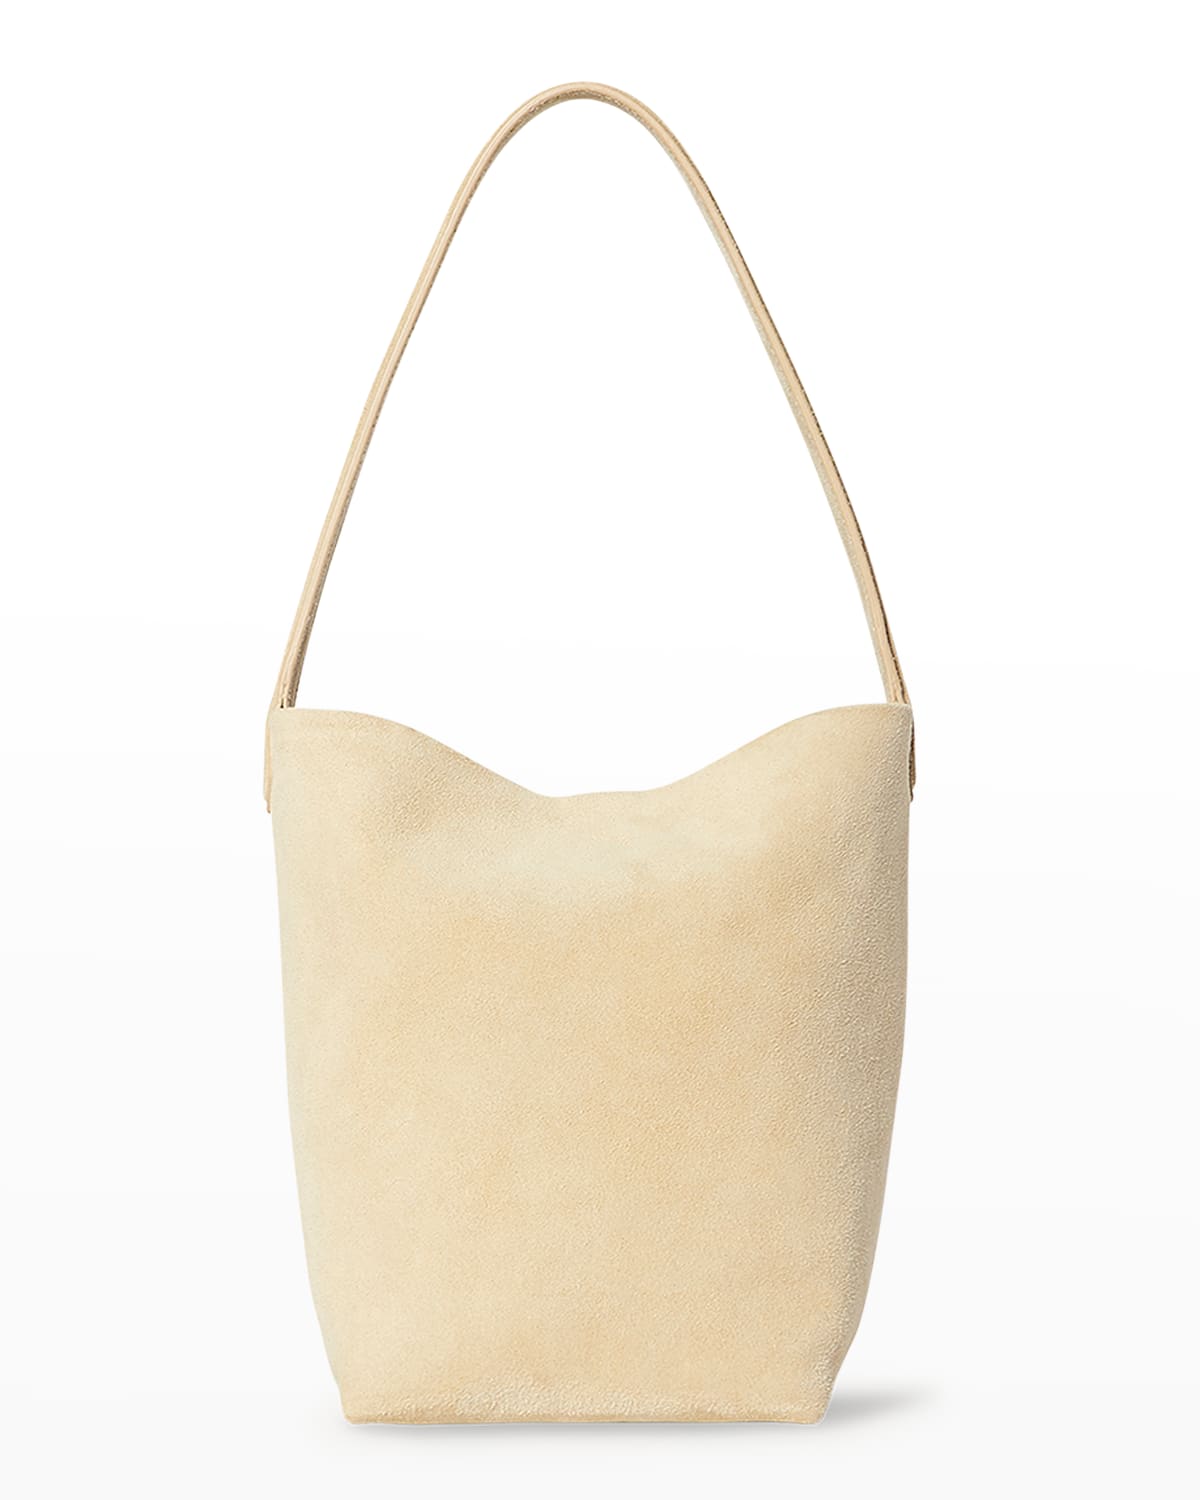 Park Small North-South Tote Bag in Suede